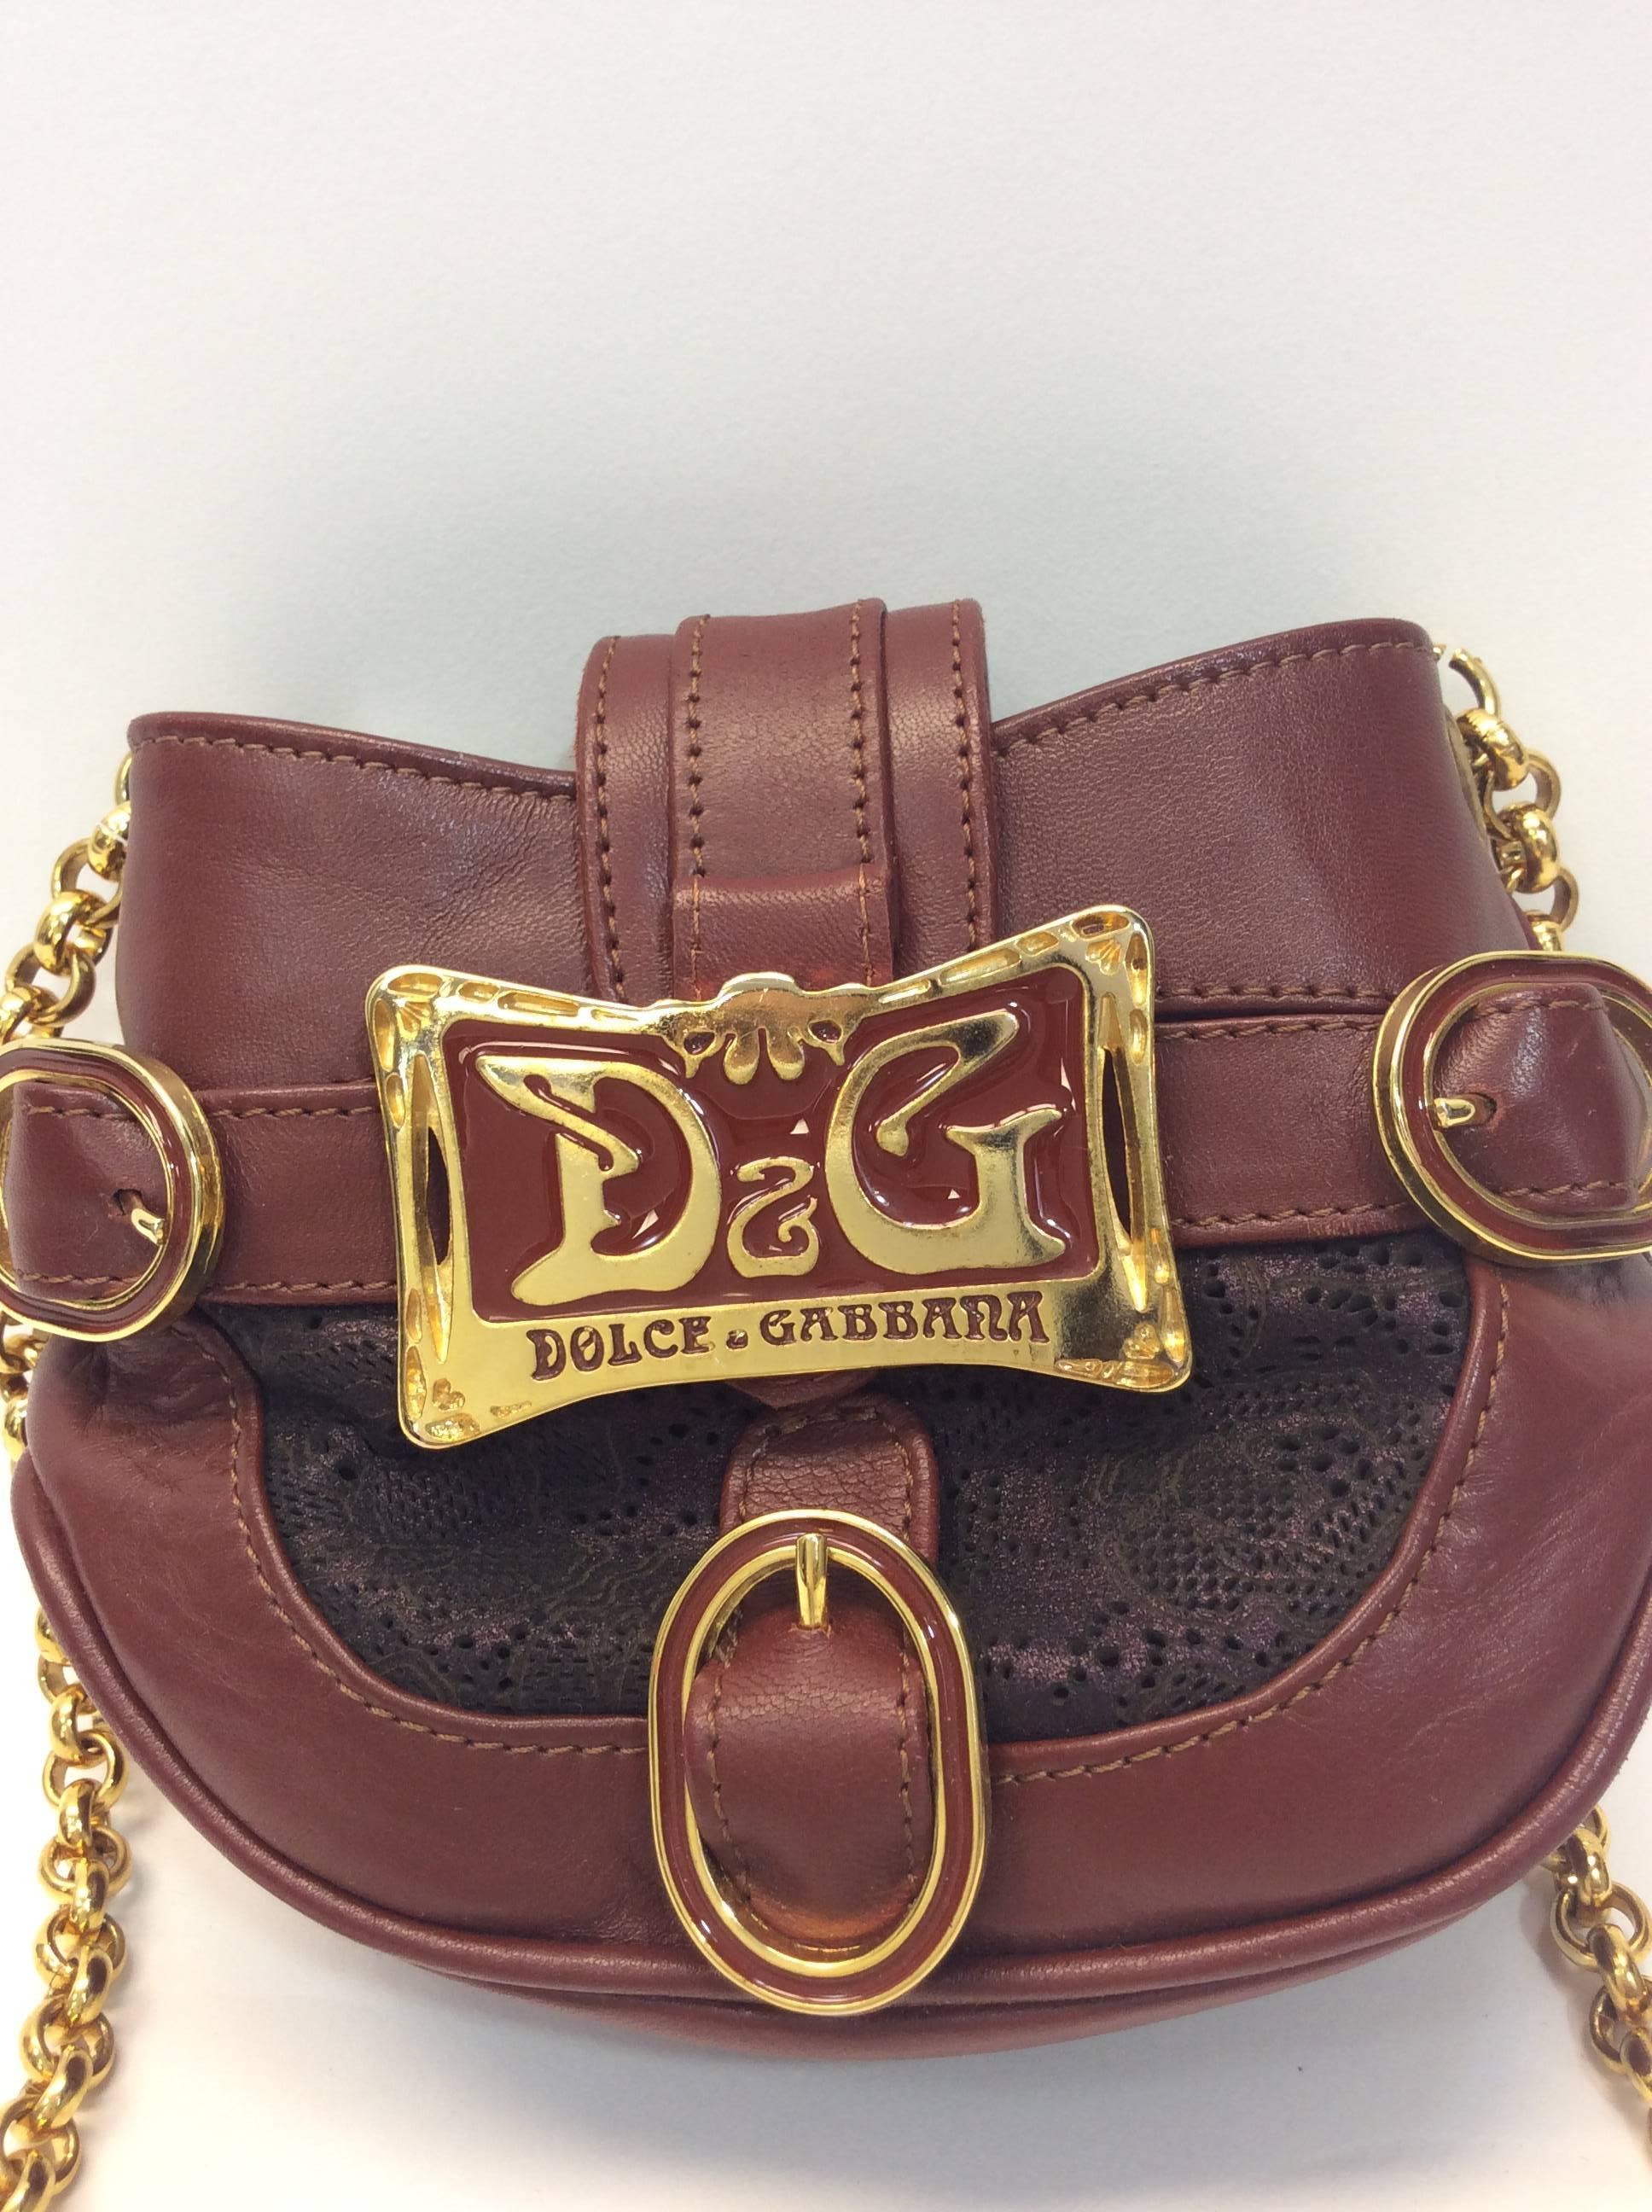 Dolc & Gabbana Gold Chain Small Crossbody
Leather exterior, lined interior 
Long gold chain &  buckle strap 
6 inches in length, 5 inches in height, 1.5 inch depth 10 inch strap drop
Made in Italy